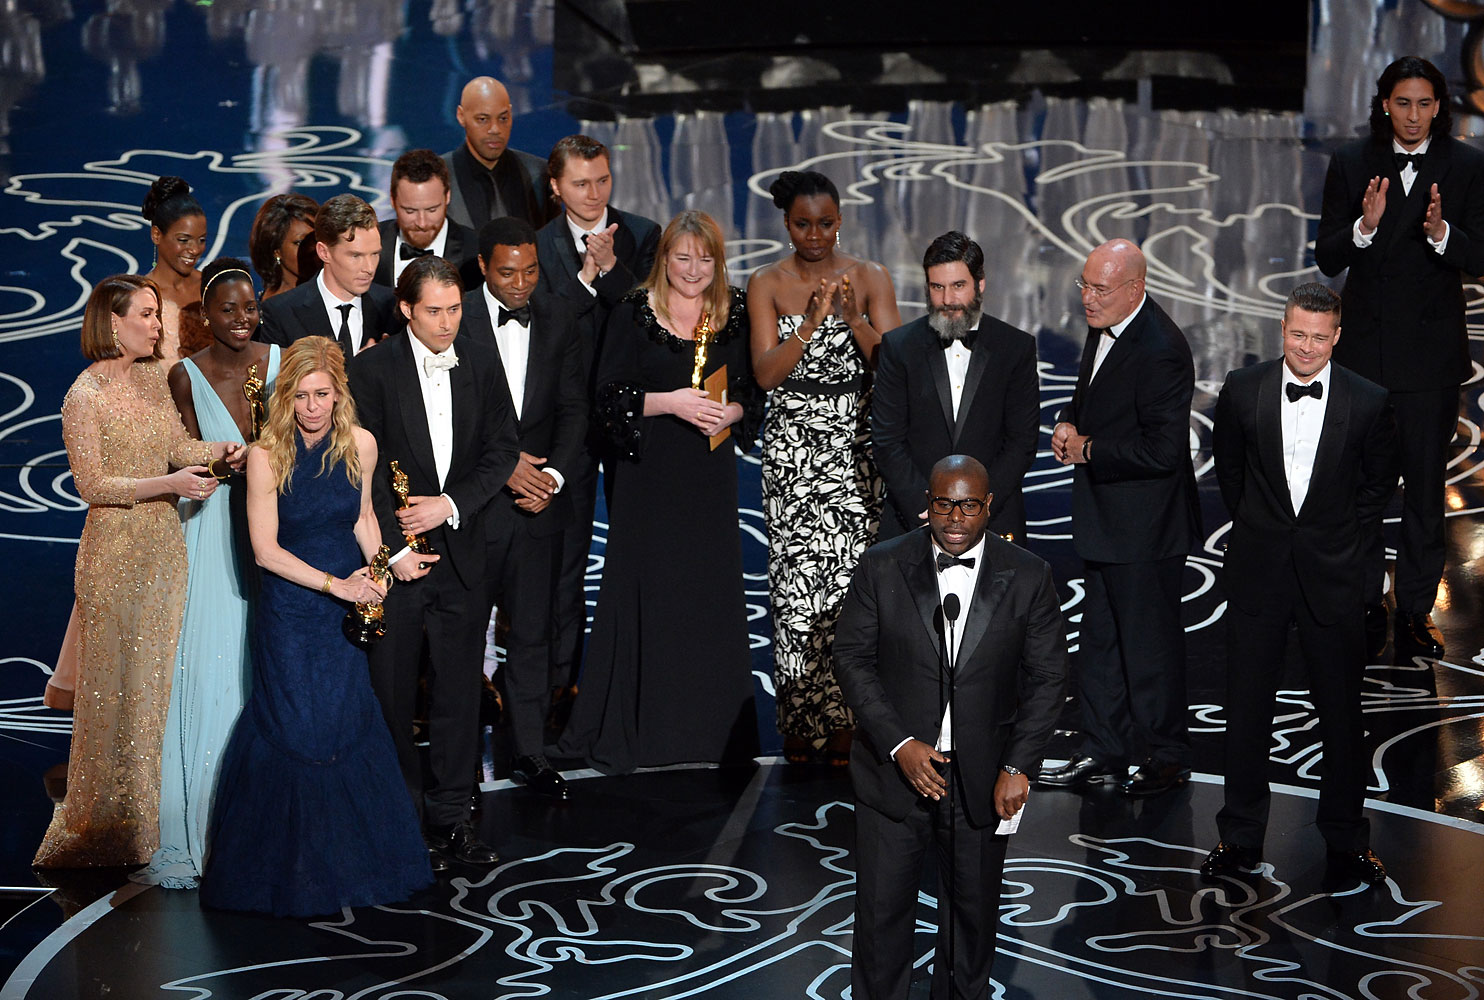 Director Steve McQueen (C) accepts the Best Picture award for '12 Years a Slave' onstage during the Oscars at the Dolby Theatre on March 2, 2014 in Hollywood, California.